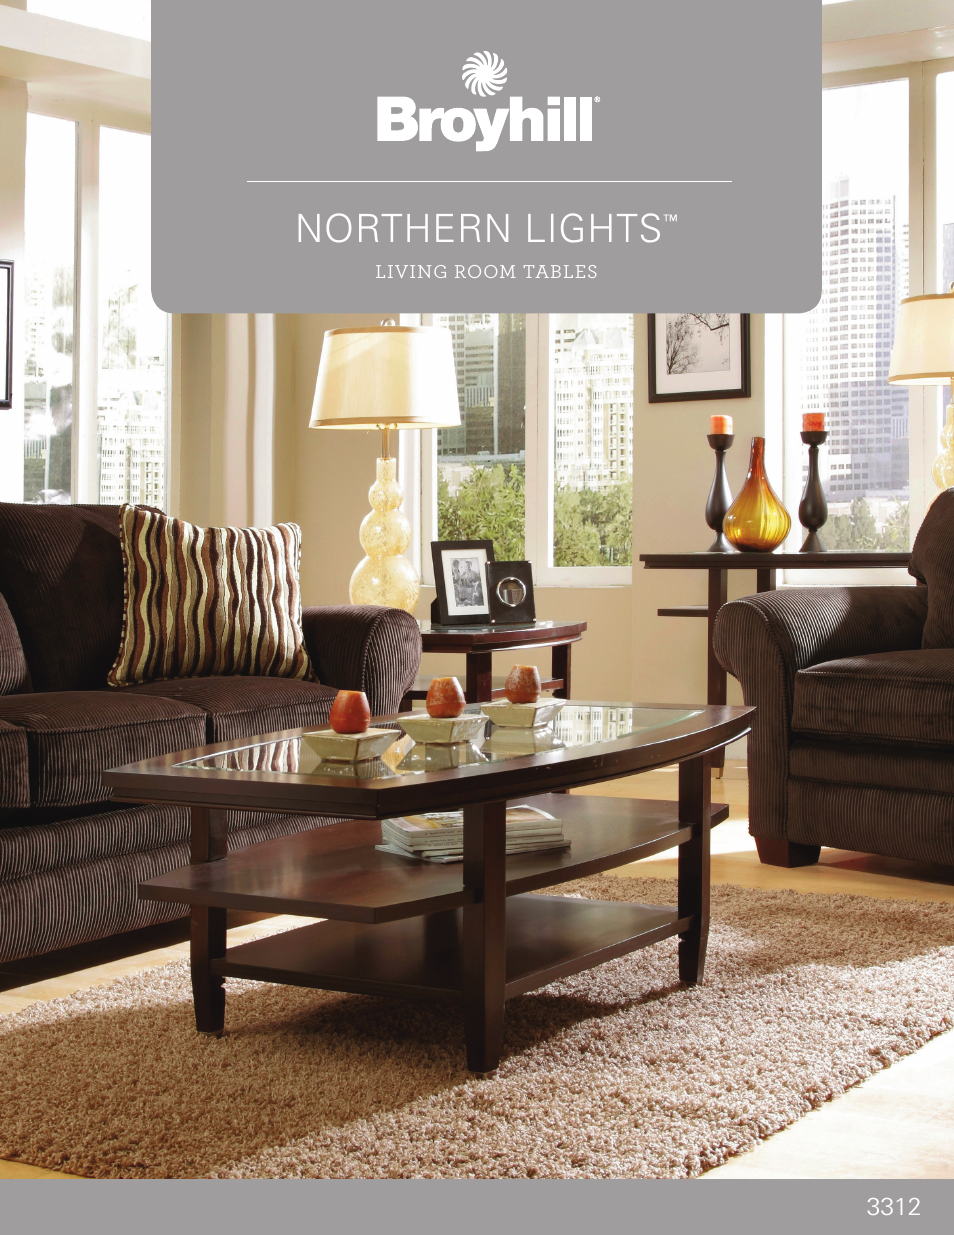 NORTHERN LIGHTS END TABLE Product Details